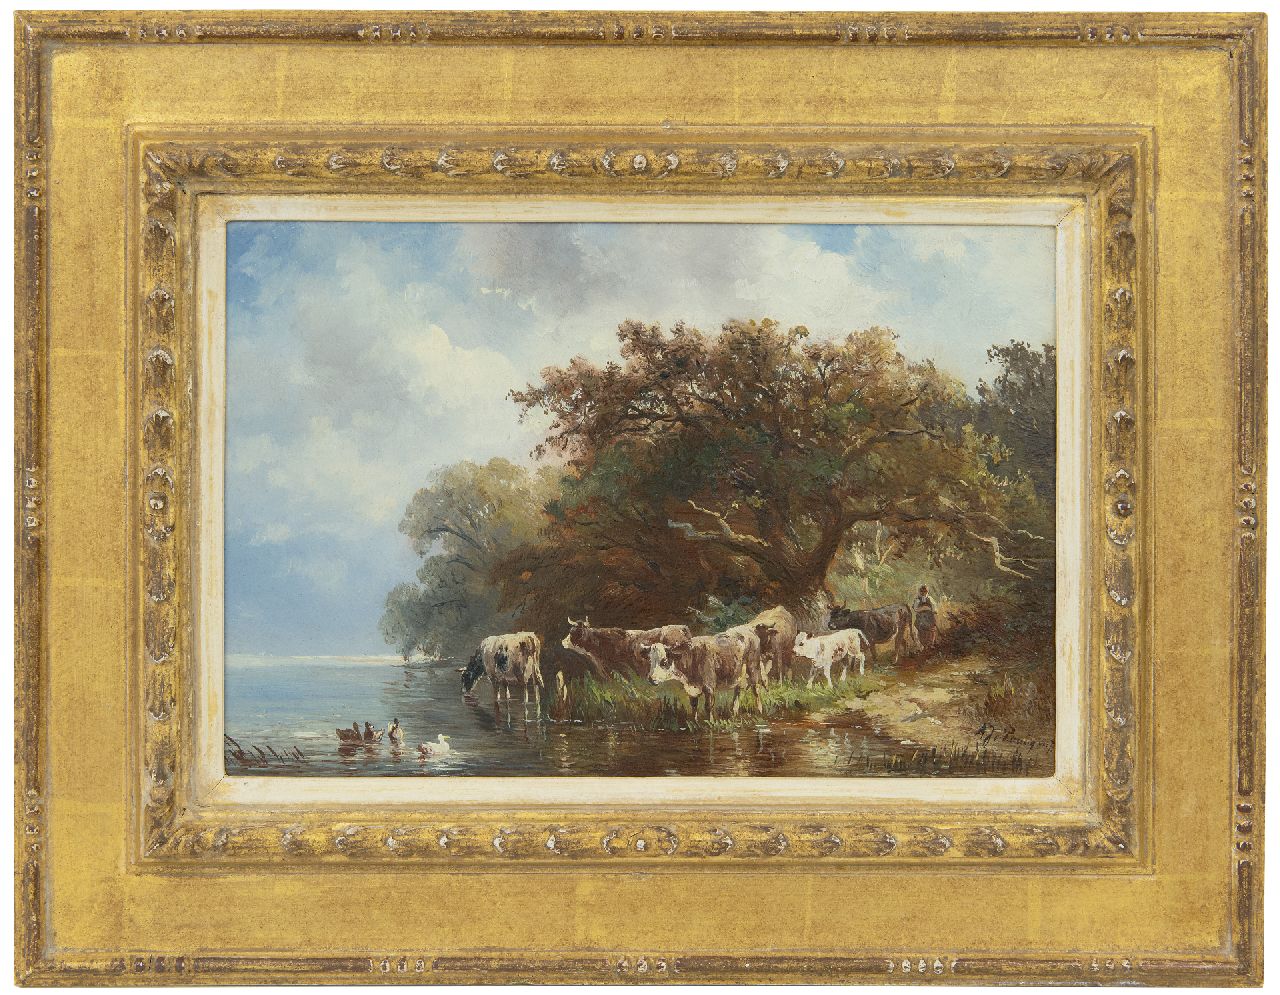 Prooijen A.J. van | Albert Jurardus van Prooijen | Paintings offered for sale | A cowherd with cattle by a river, oil on panel 19.7 x 29.1 cm, signed l.r.